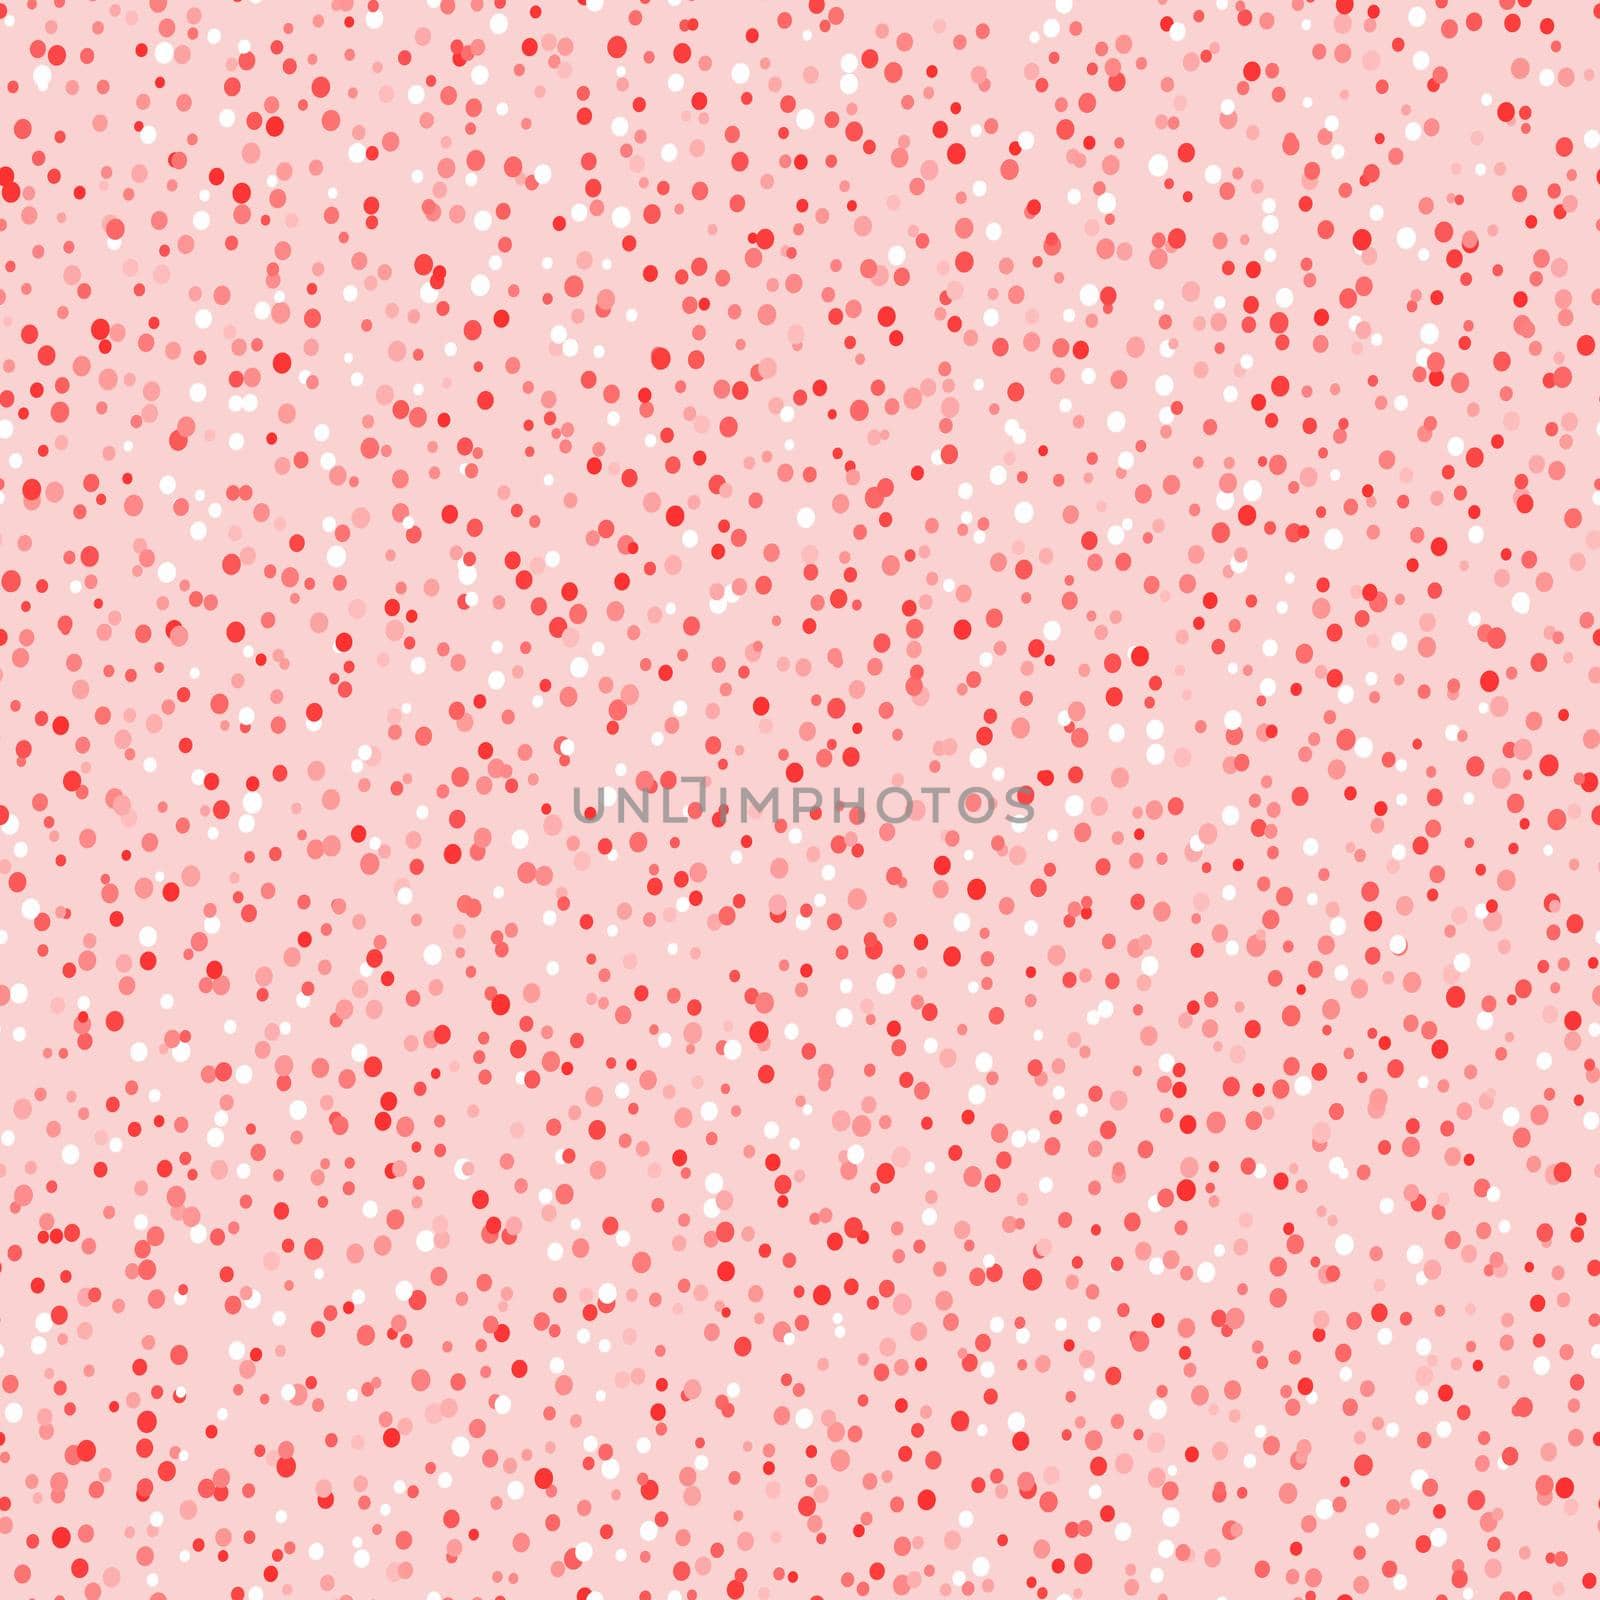 Abstract fashion polka dots background. Pink seamless pattern with gradient circles. Template design for invitation, poster, card, flyer, banner, textile, fabric